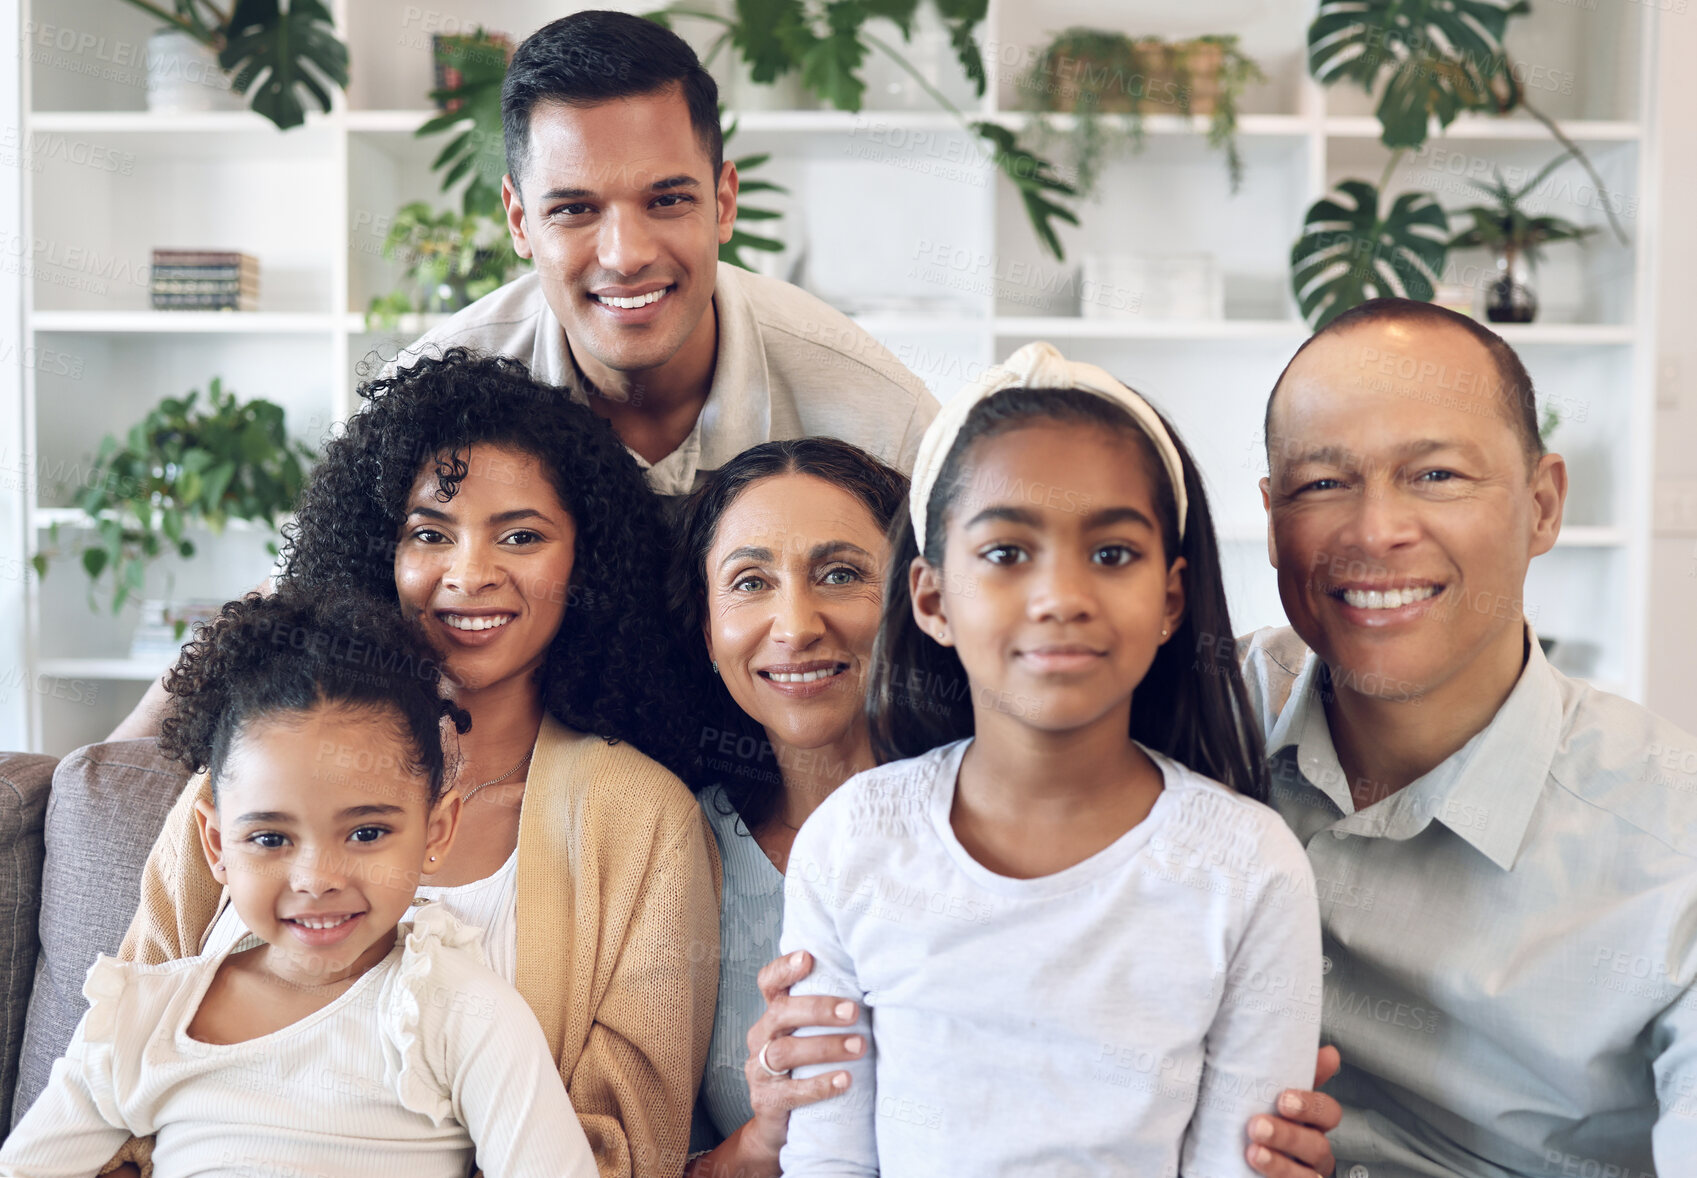 Buy stock photo Portrait of family with kids, parents and grandparents on sofa with smile in happy home in Brazil. Happiness, generations of men and women with children, spending time together making fun memories.